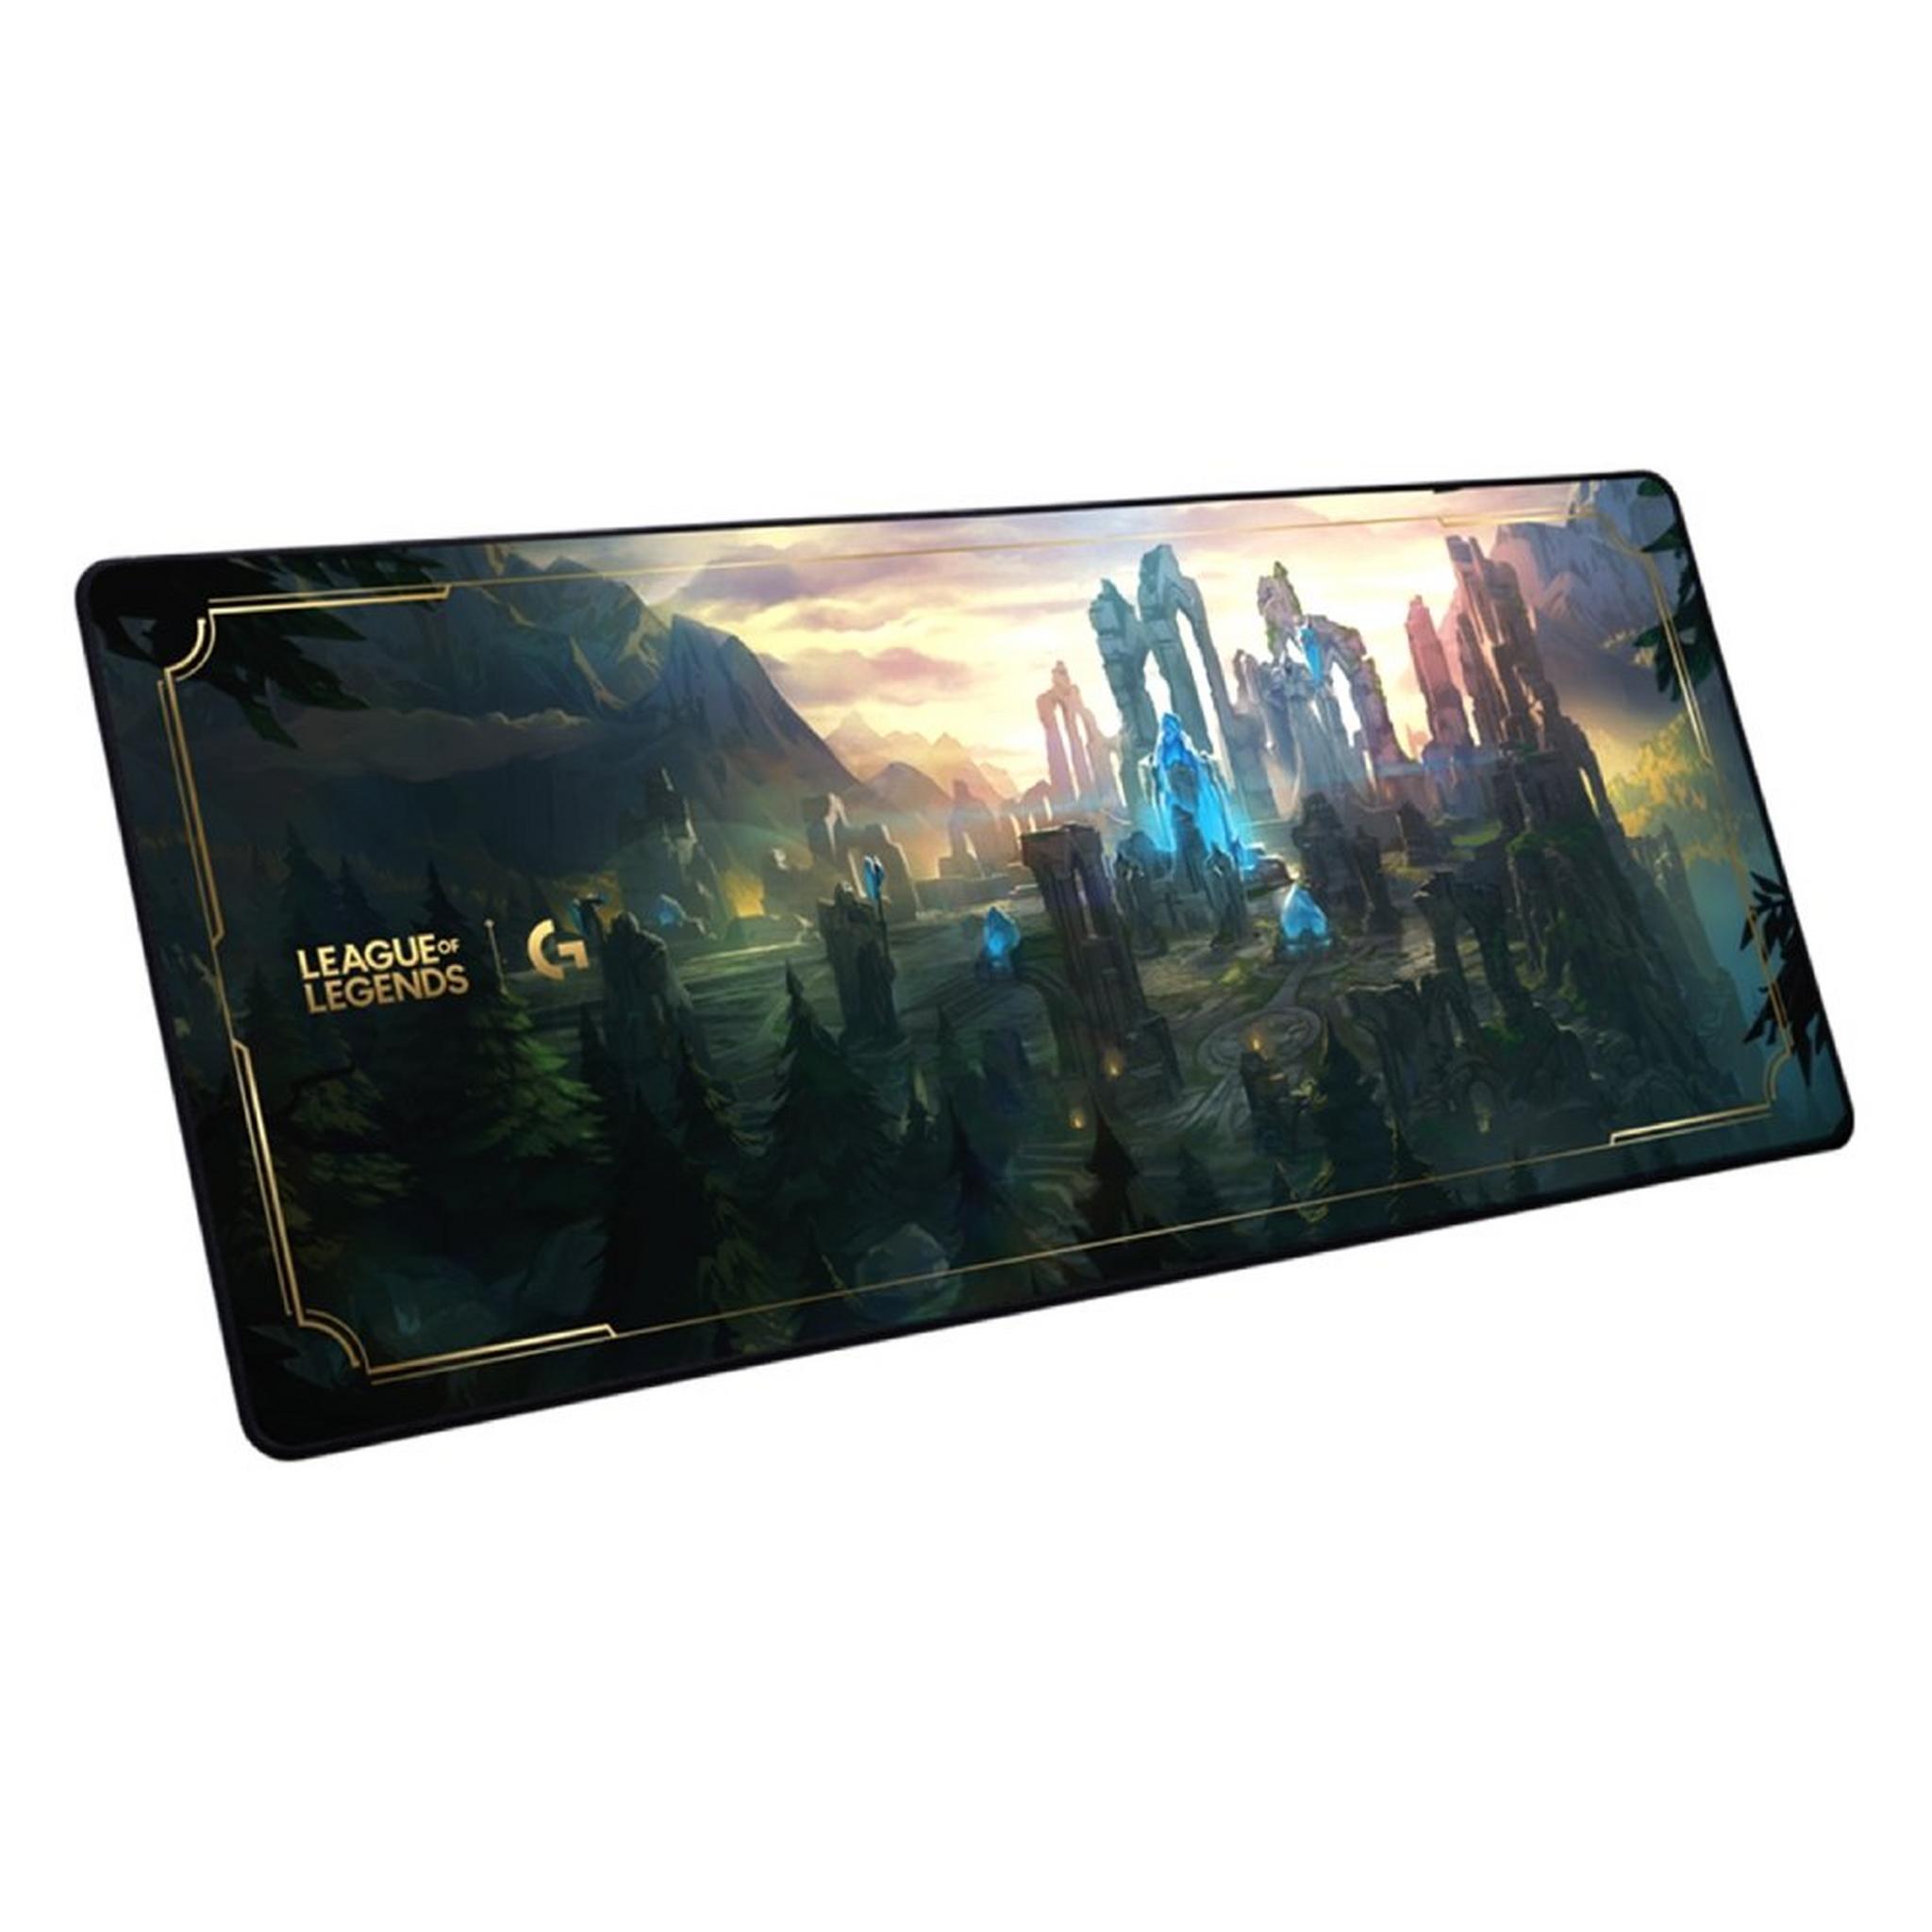 Logitech G480 Gaming Mouse Pad - League of Legends Edition